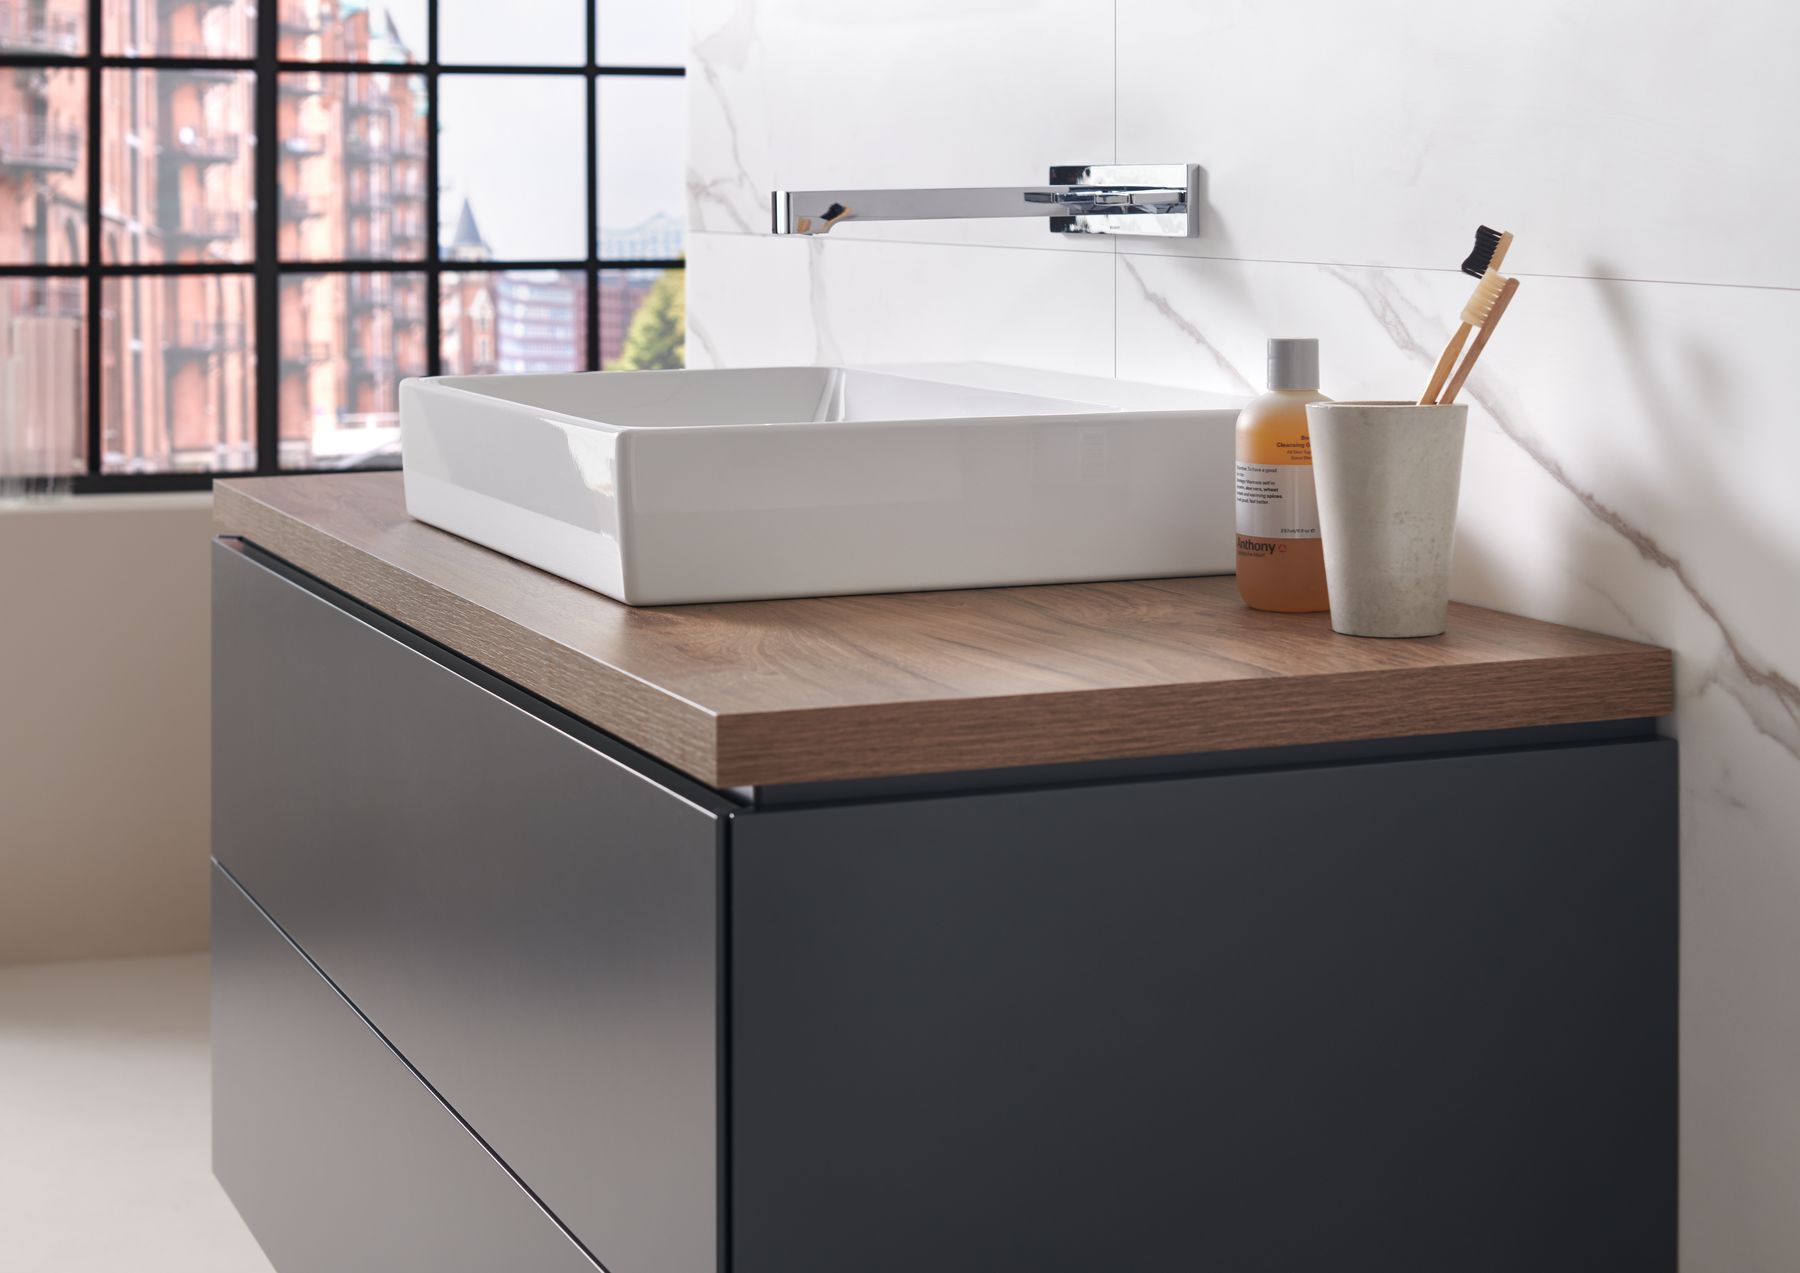 Geberit expands its offering with brand new product launches